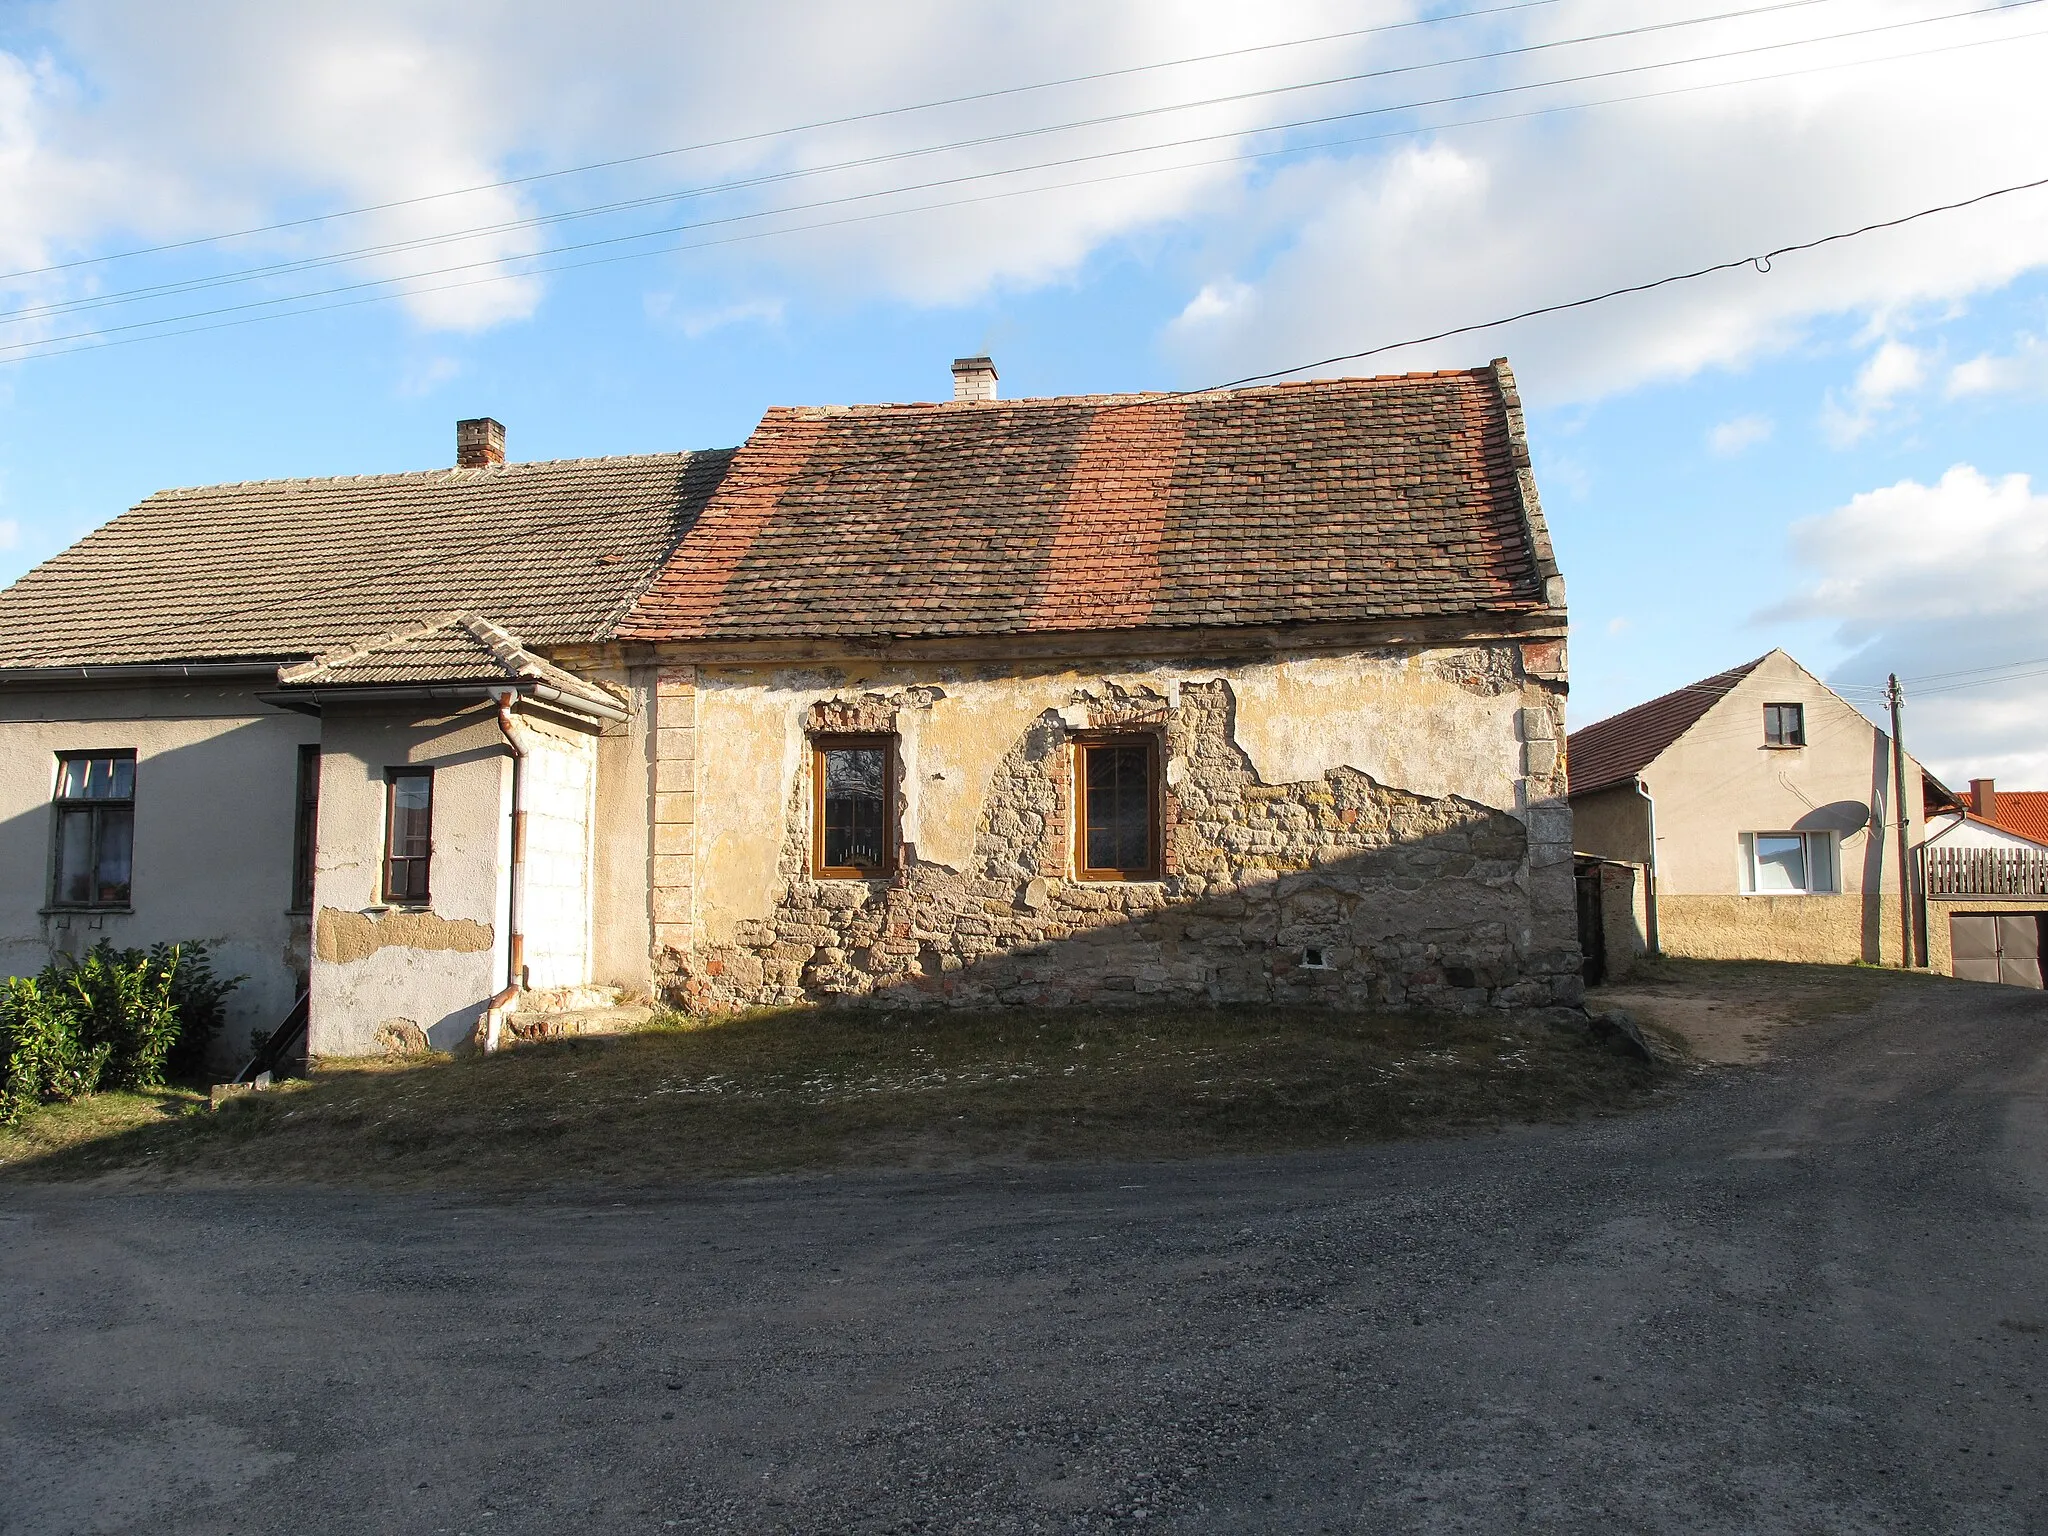 Photo showing: Houses in Tuřany village, Kladno District, Czech Republic.